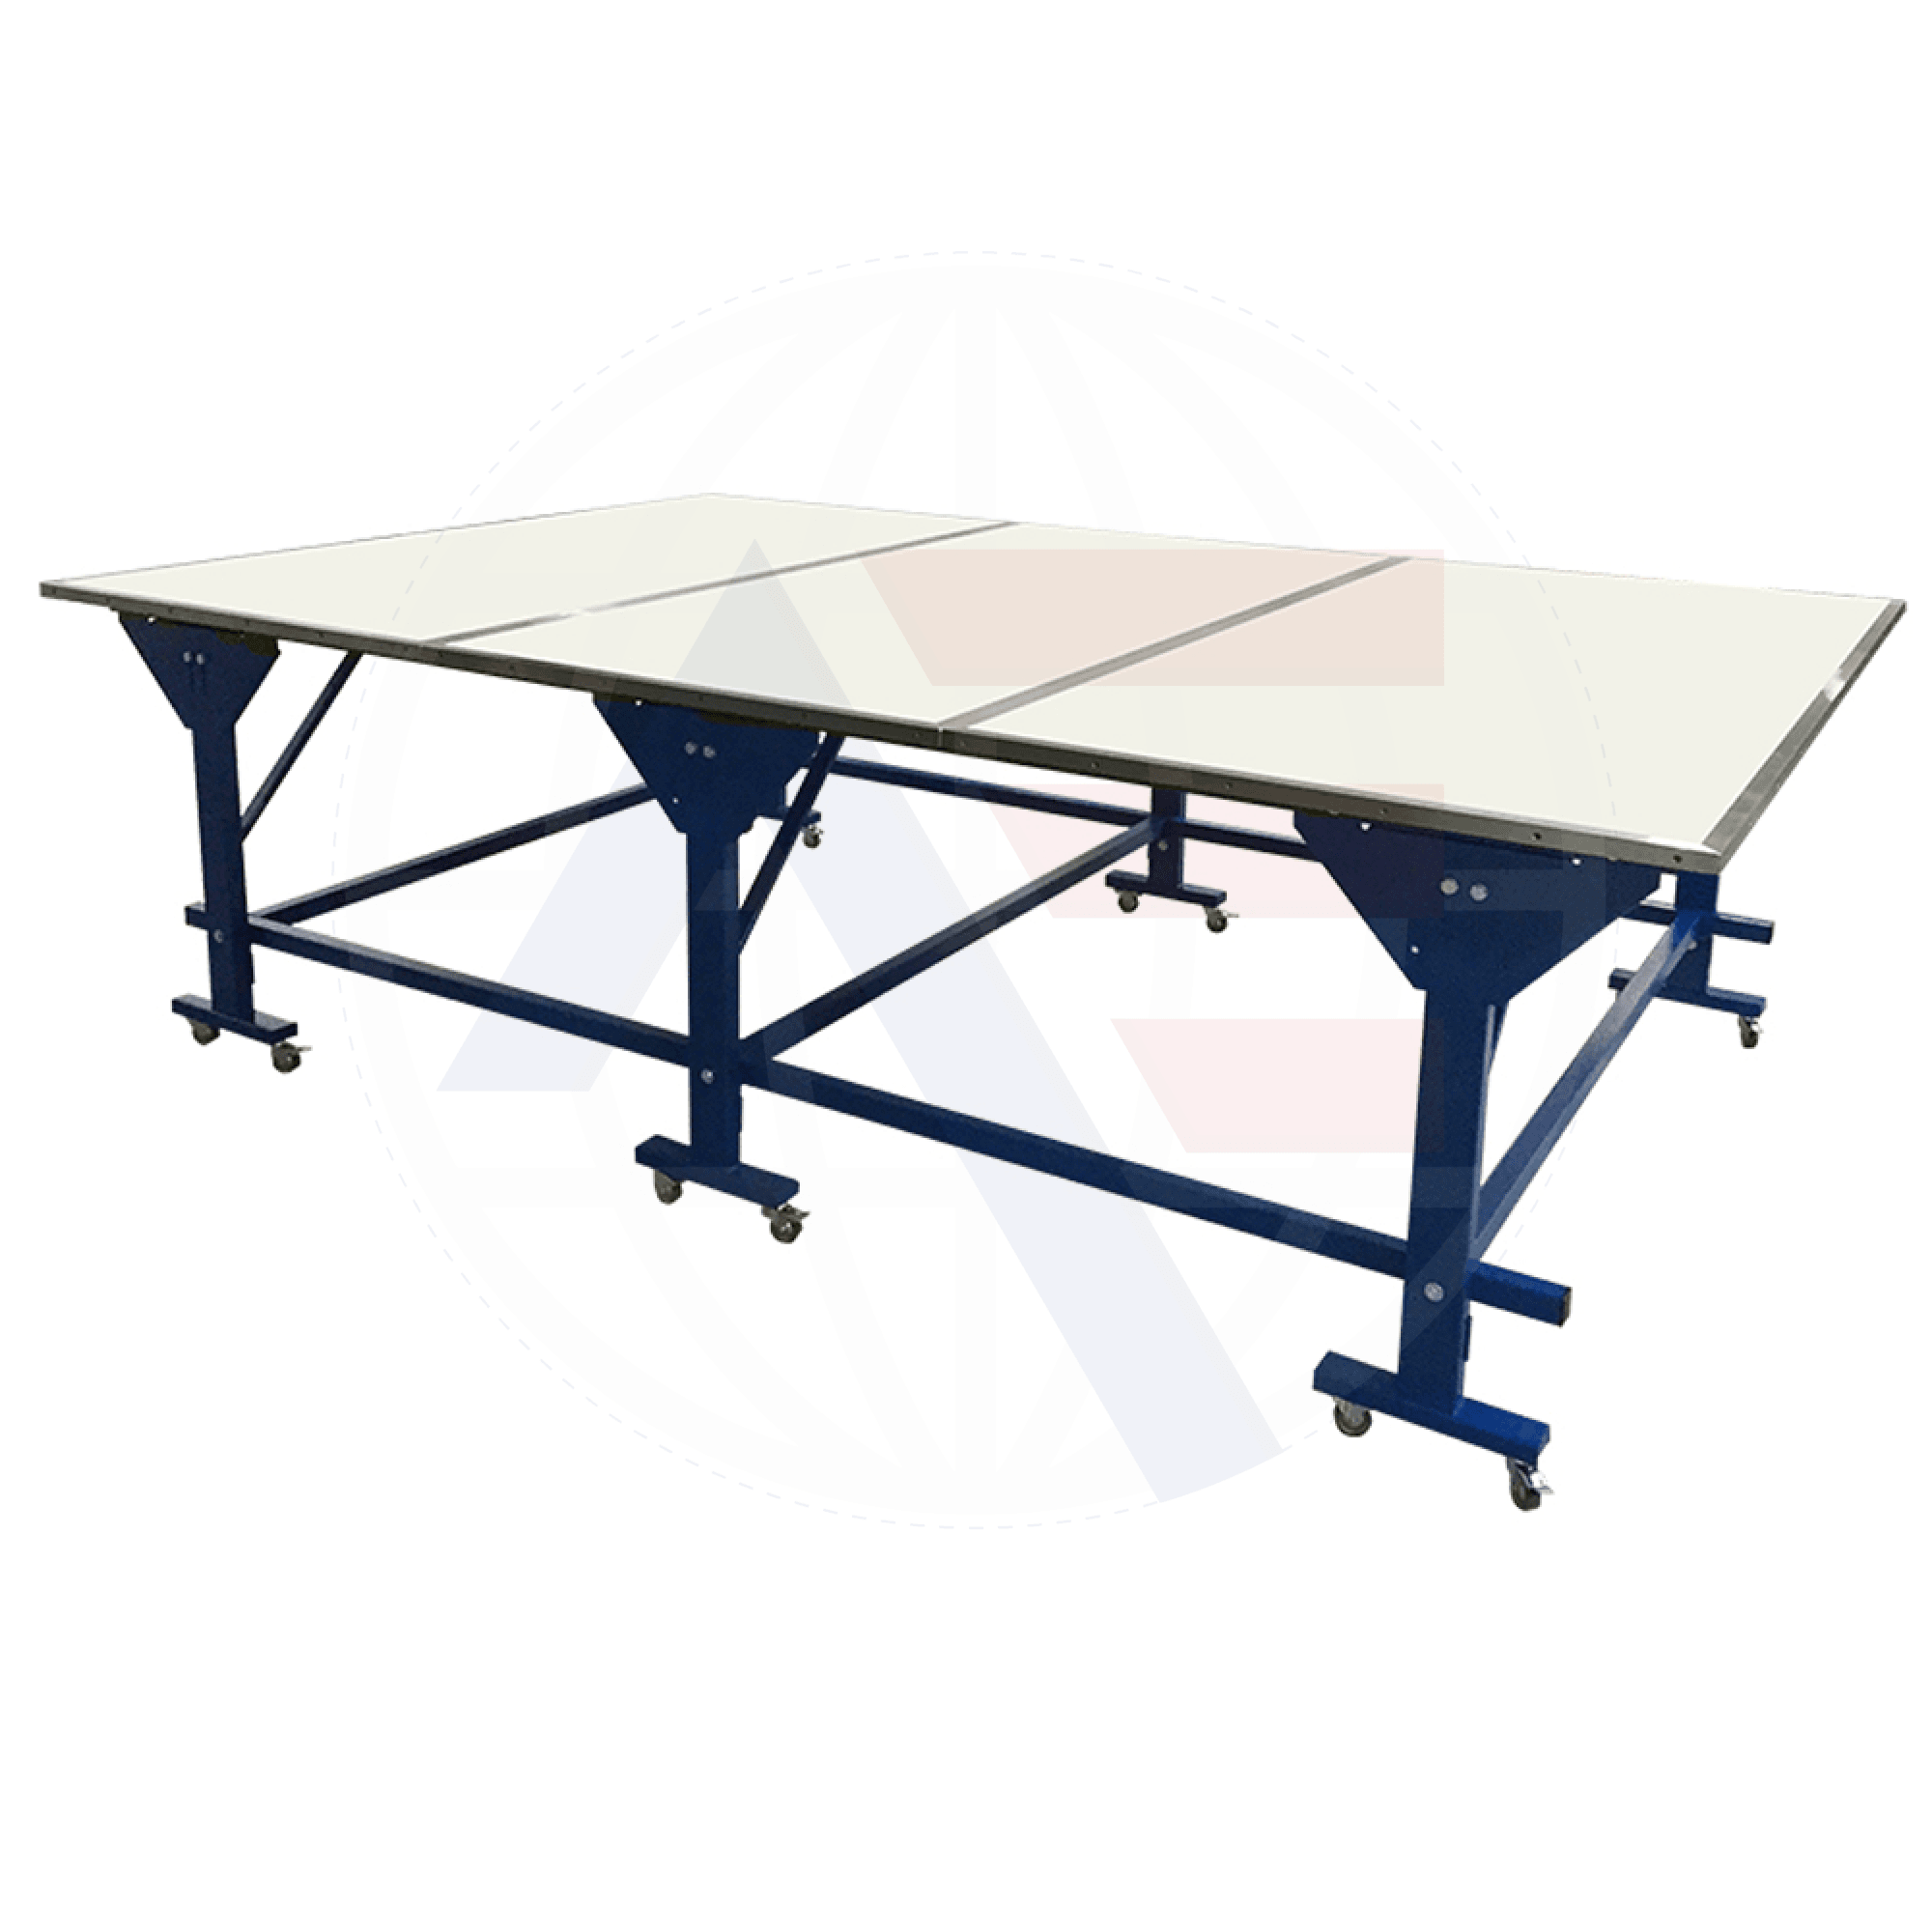 Rexel Sk-3 Professional Fabric Cutting Table